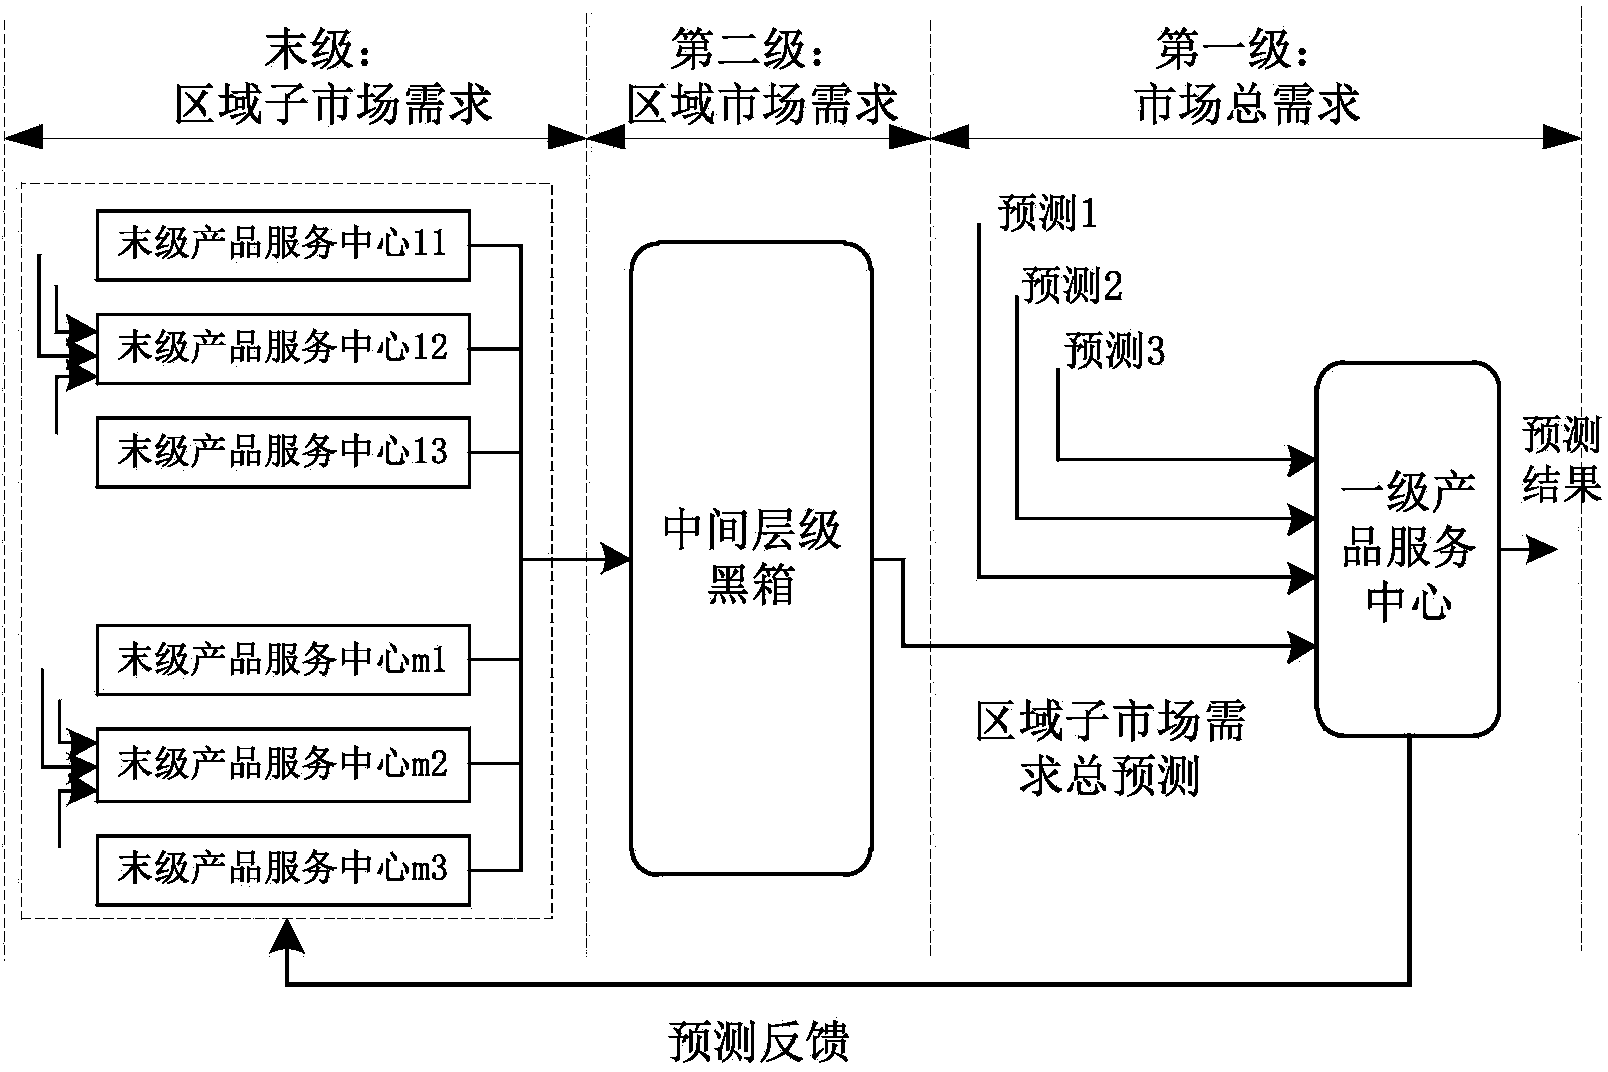 Product service demand forecasting and resource optimization configuration method